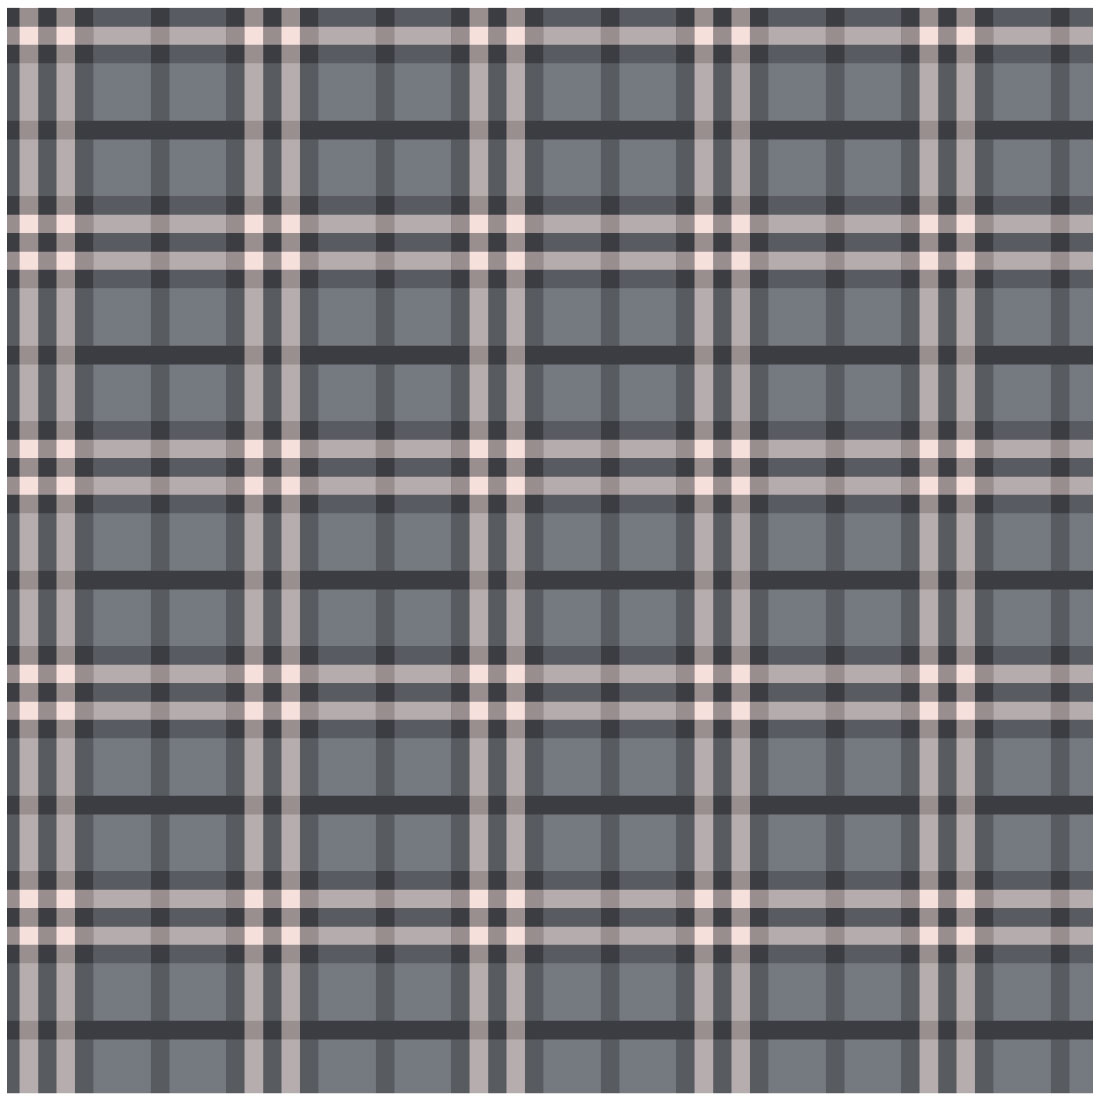 Plaid Seamless Patterns cover image.